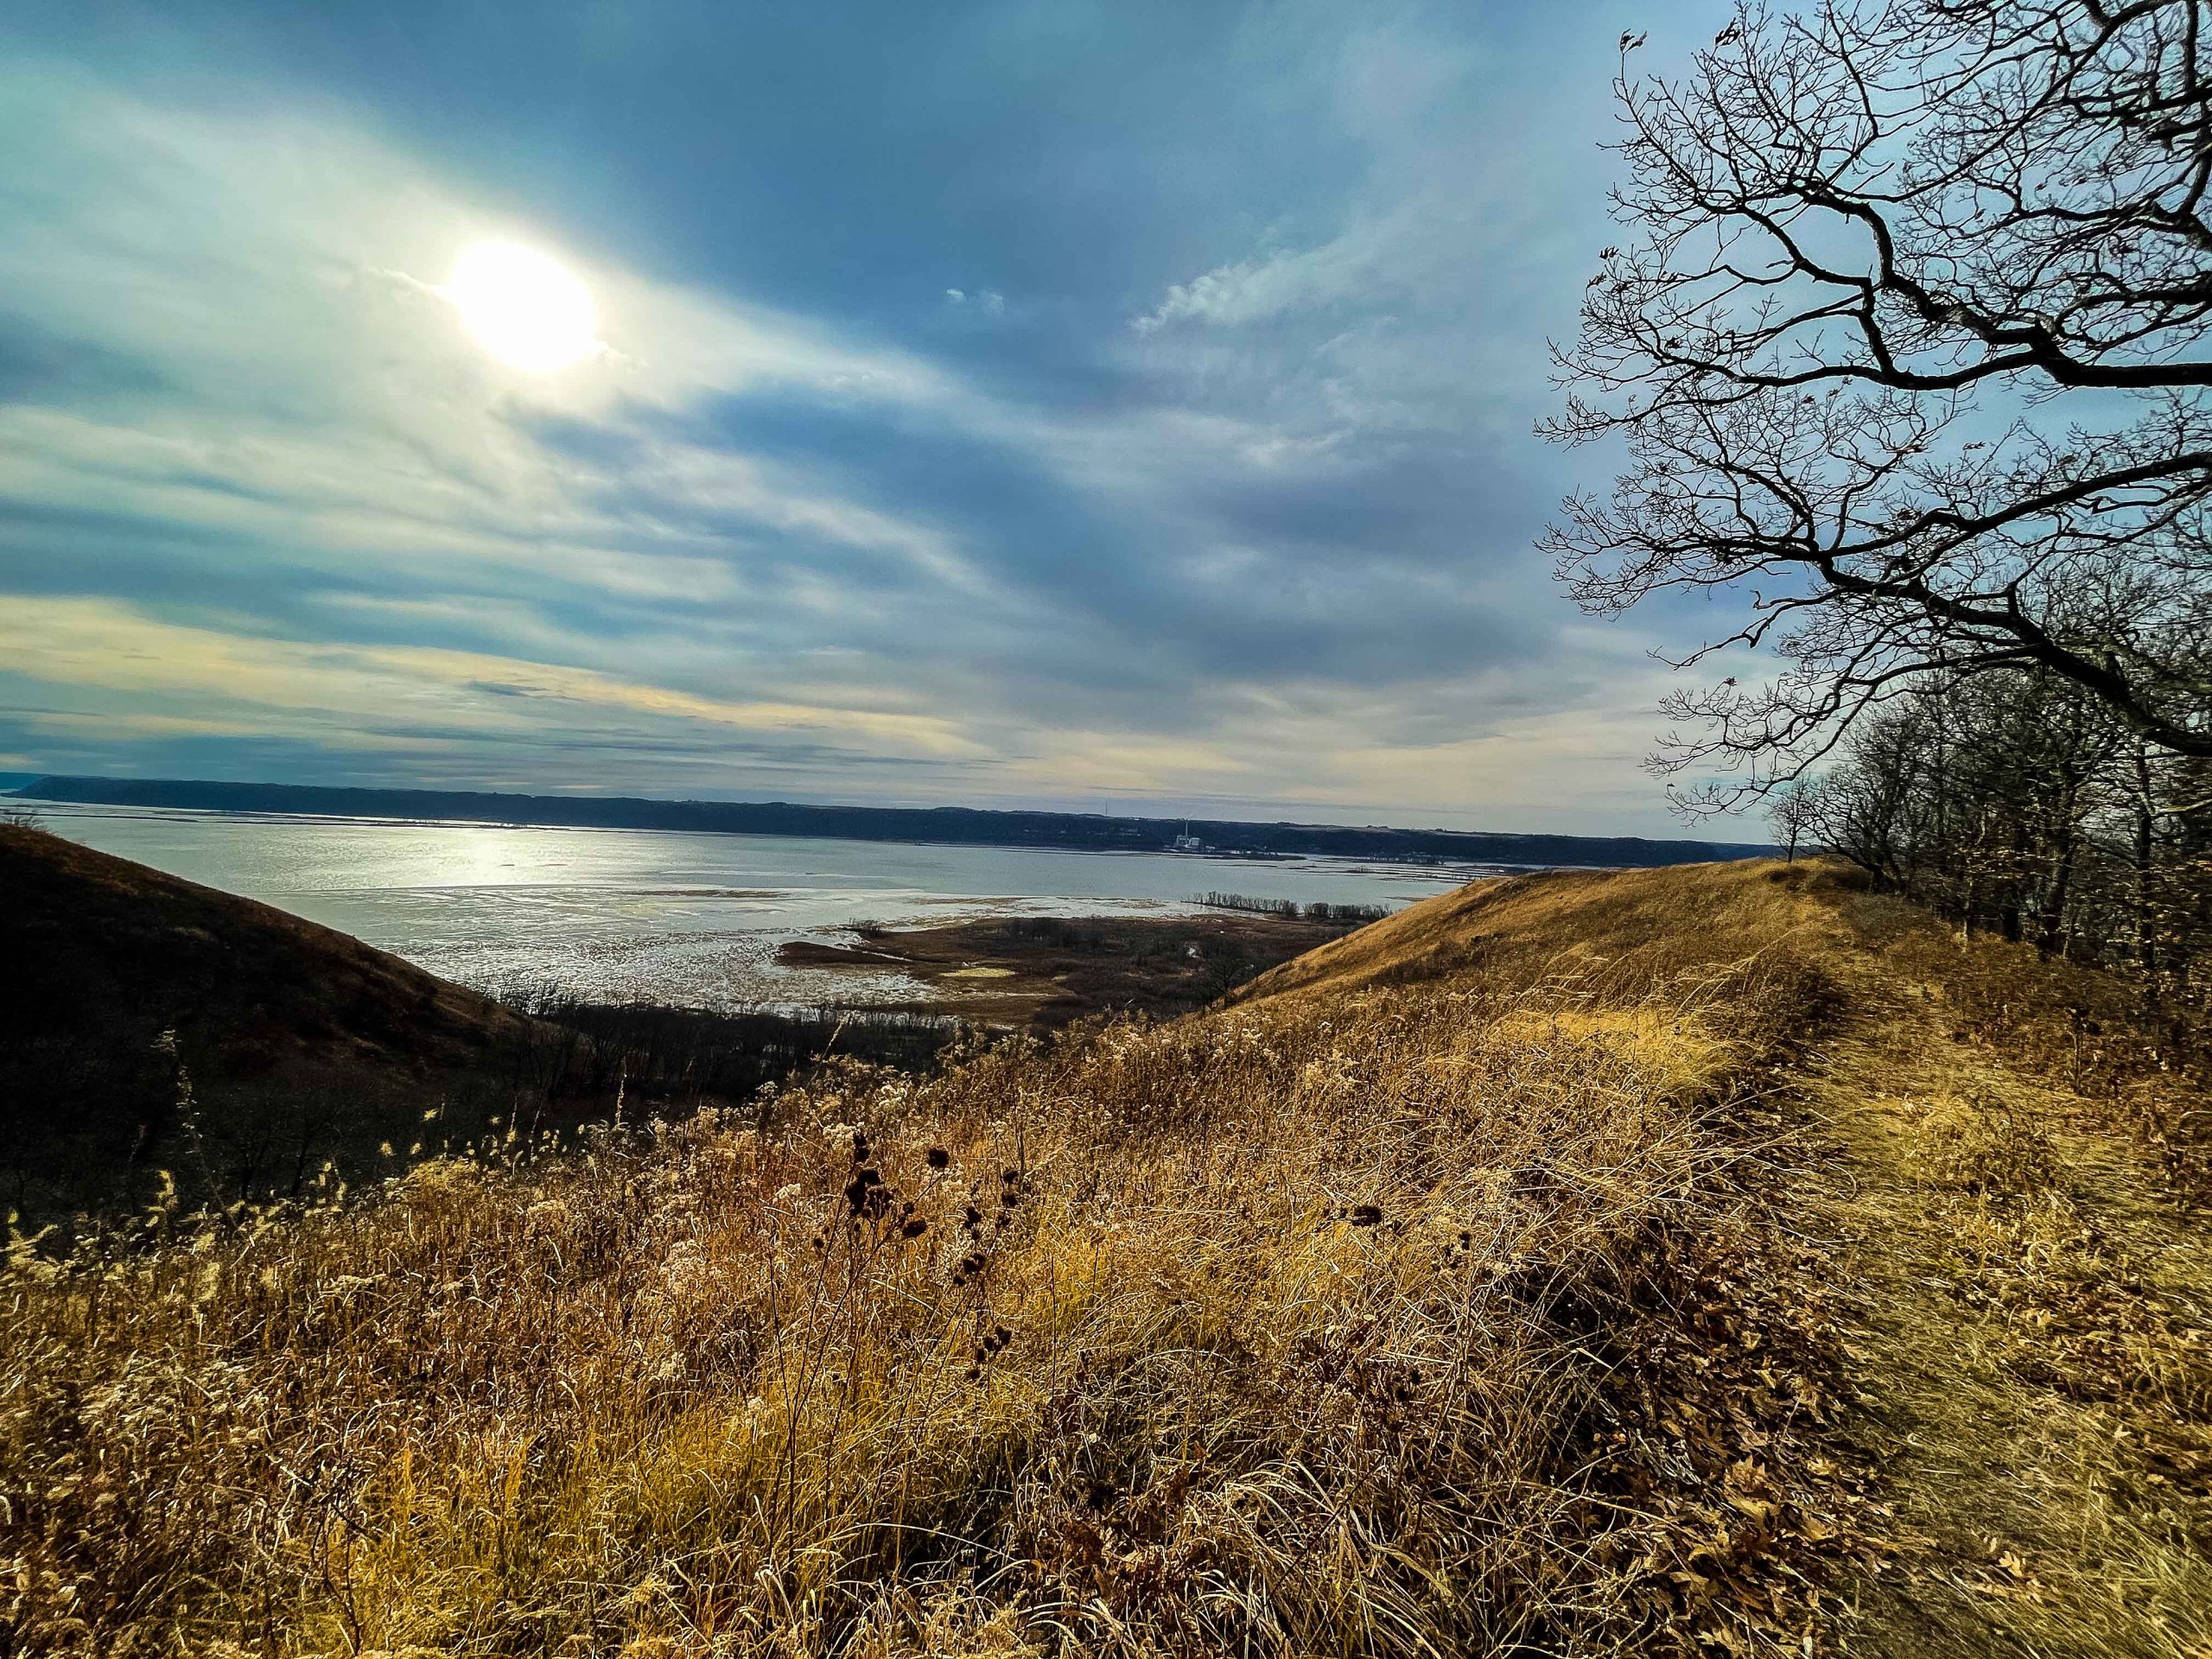 Rush Creek Bluff, Overlooking the Mississippi River